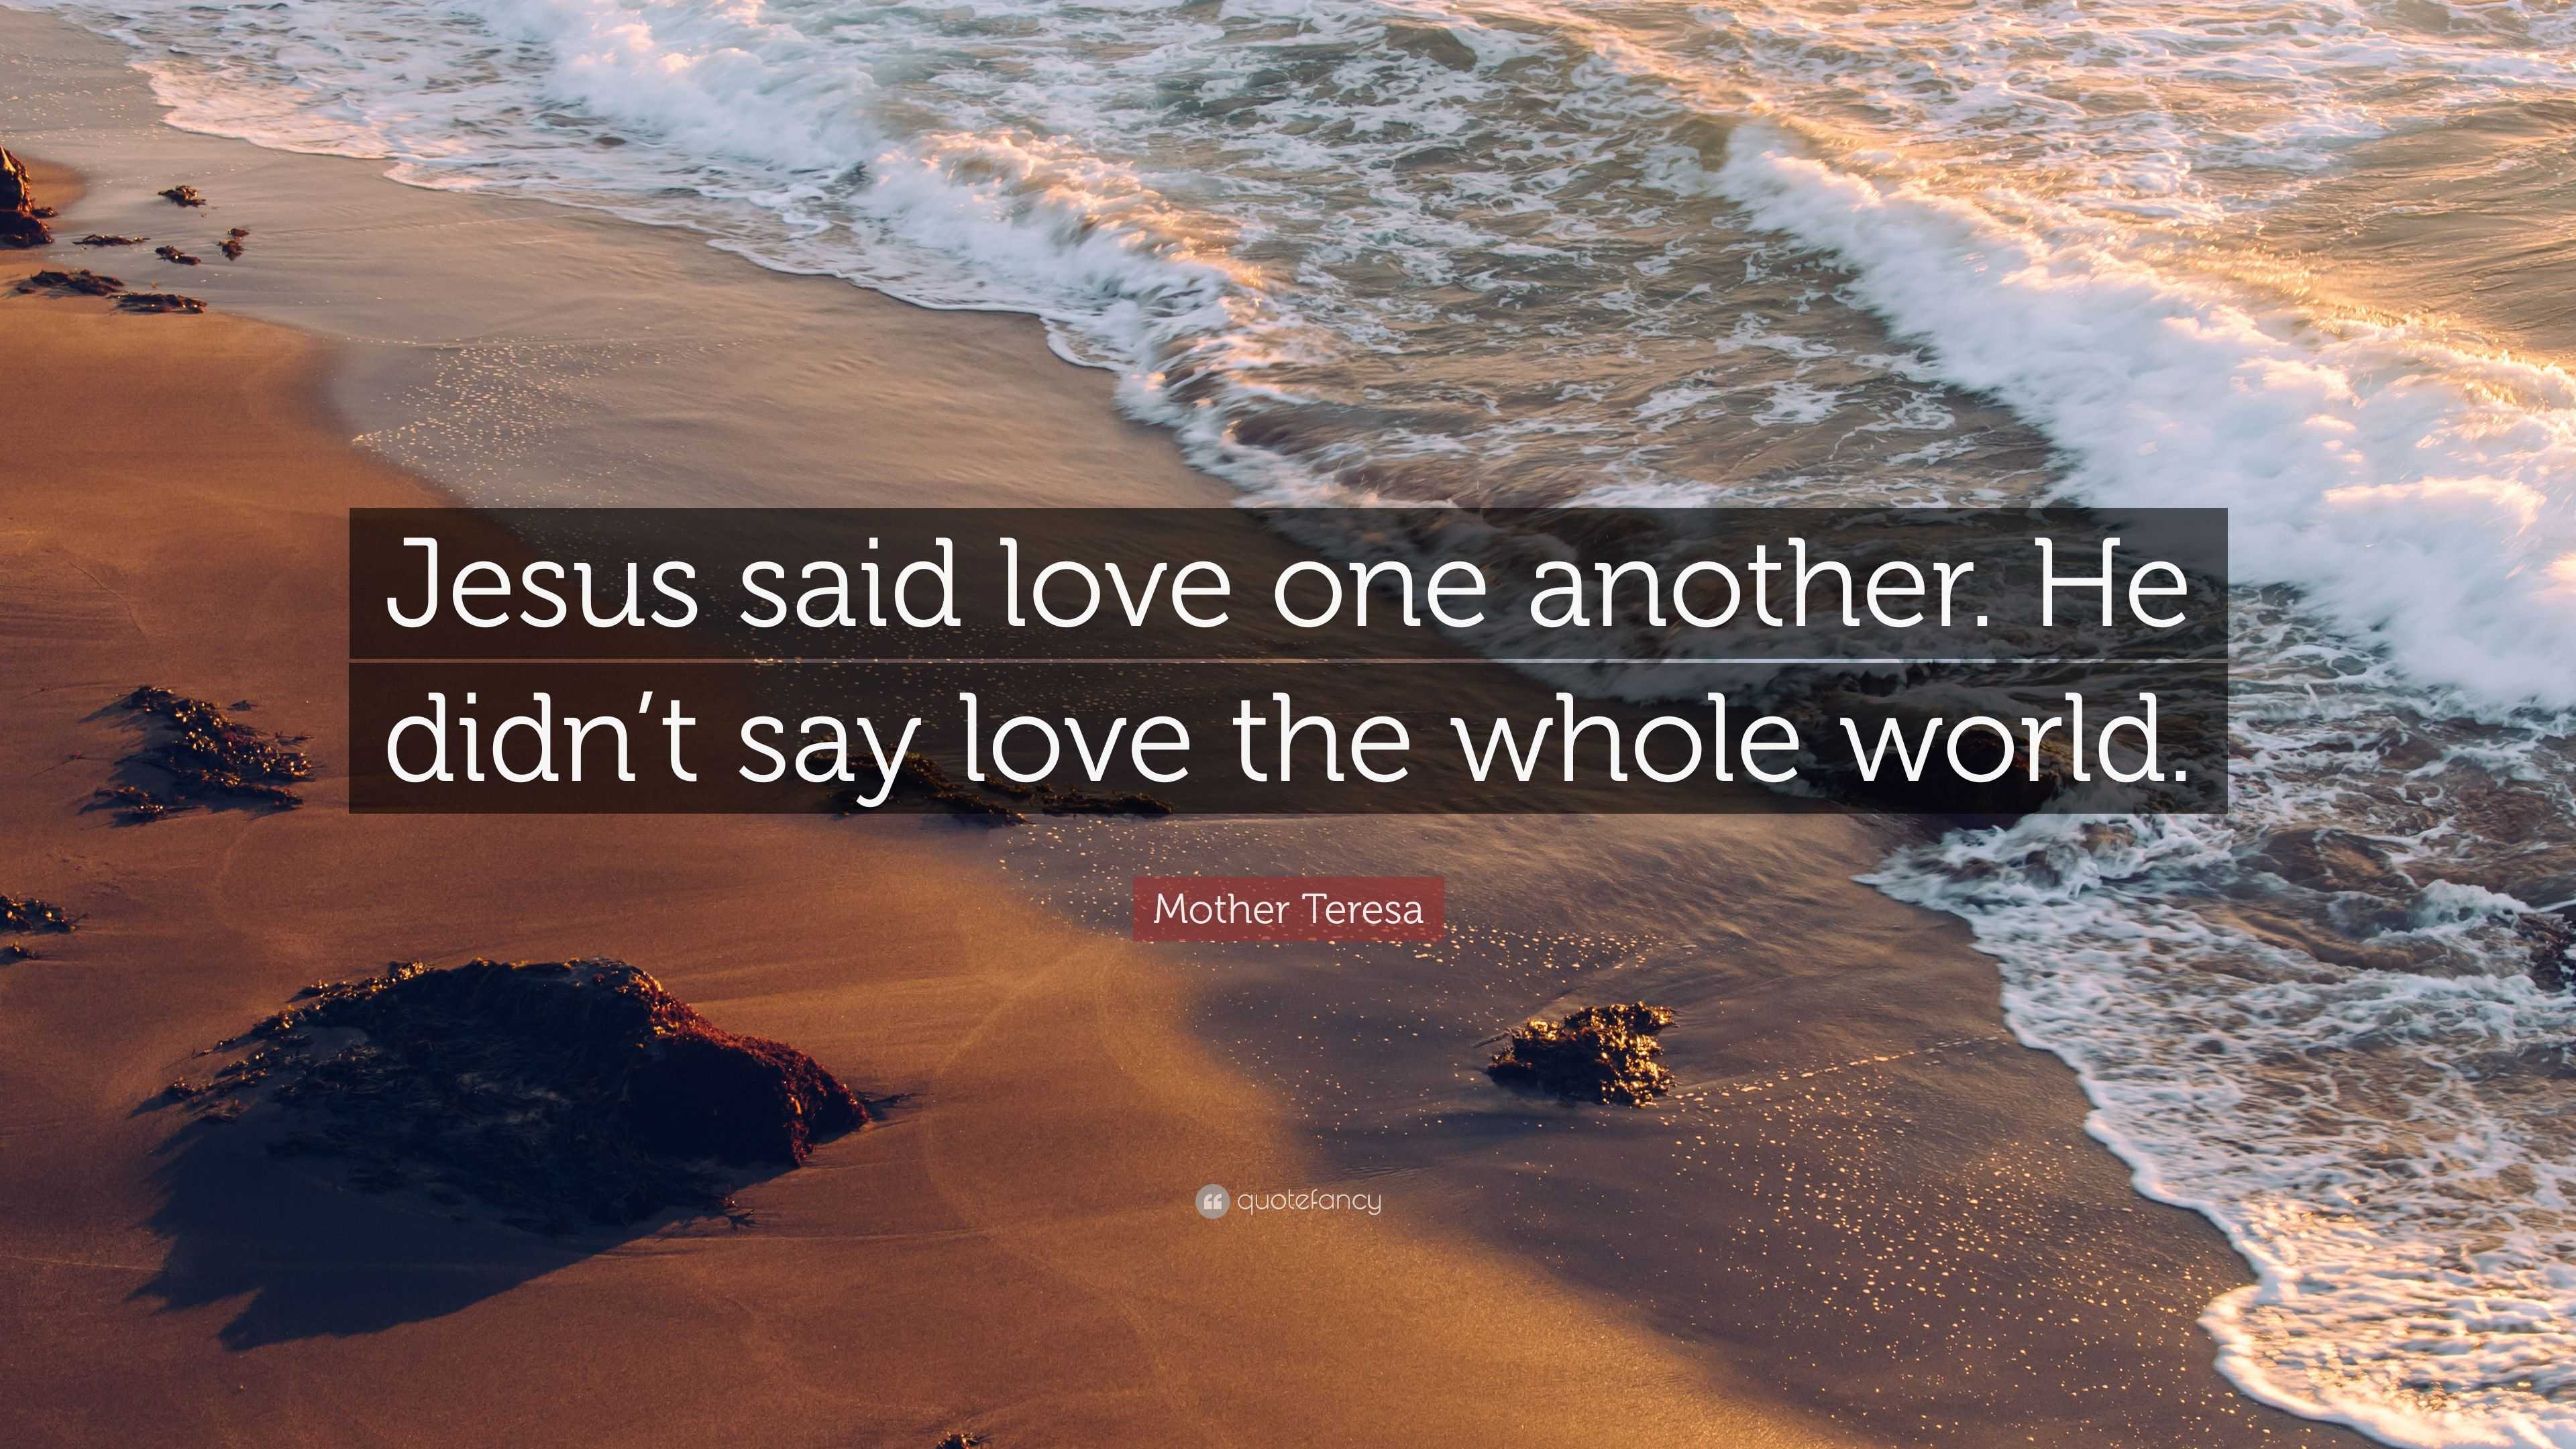 Mother Teresa Quote “Jesus said love one another He didn t say